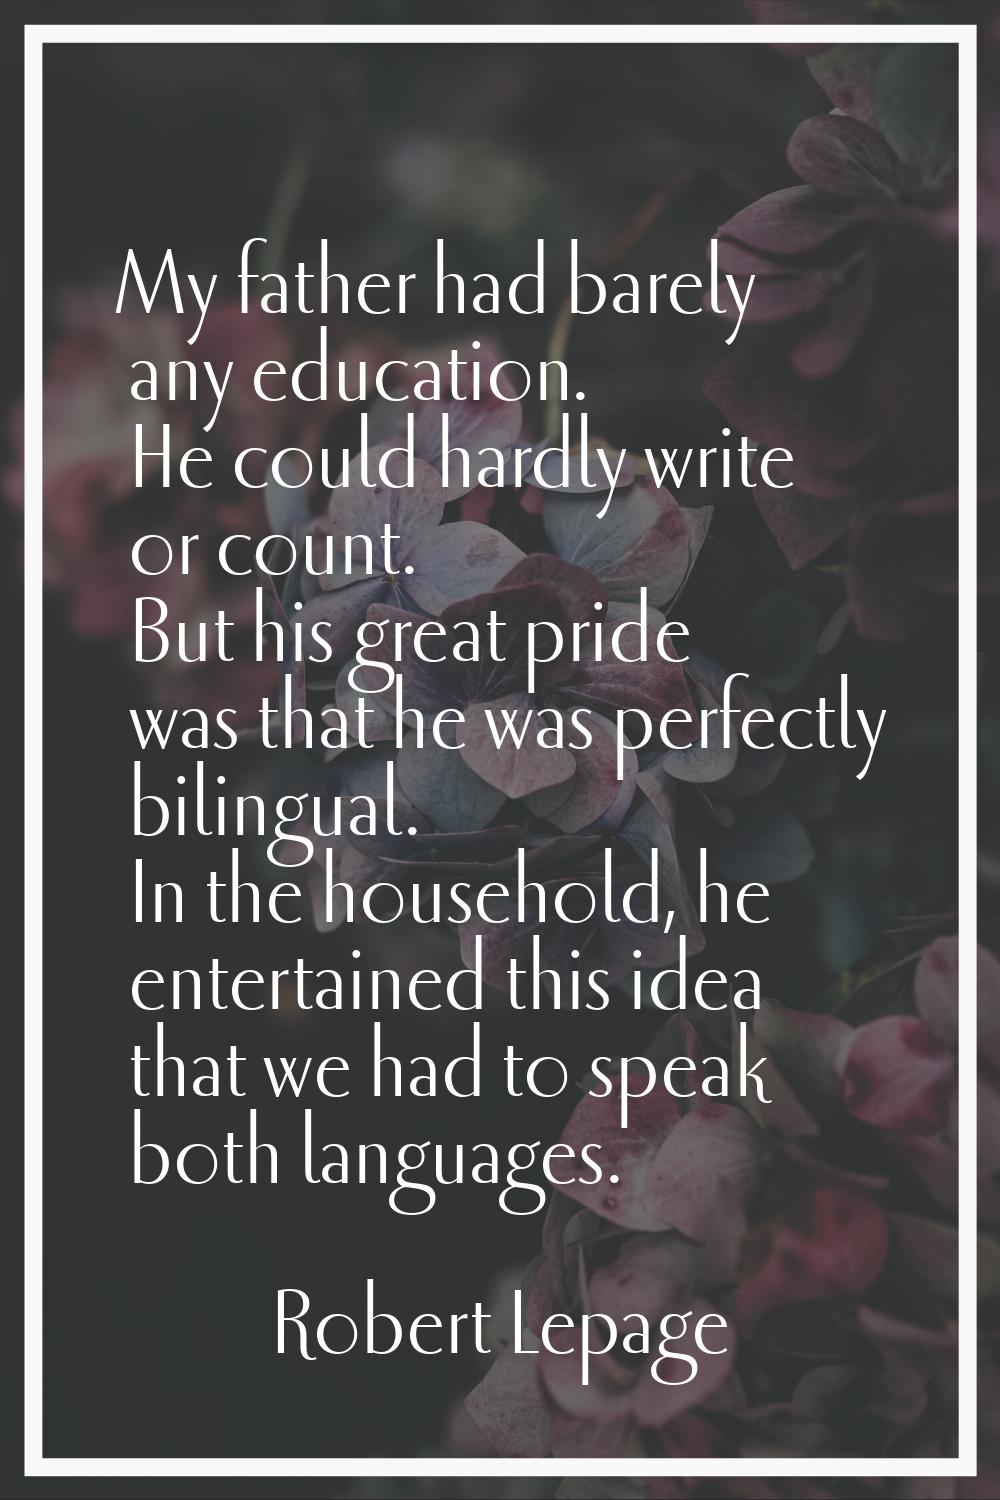 My father had barely any education. He could hardly write or count. But his great pride was that he